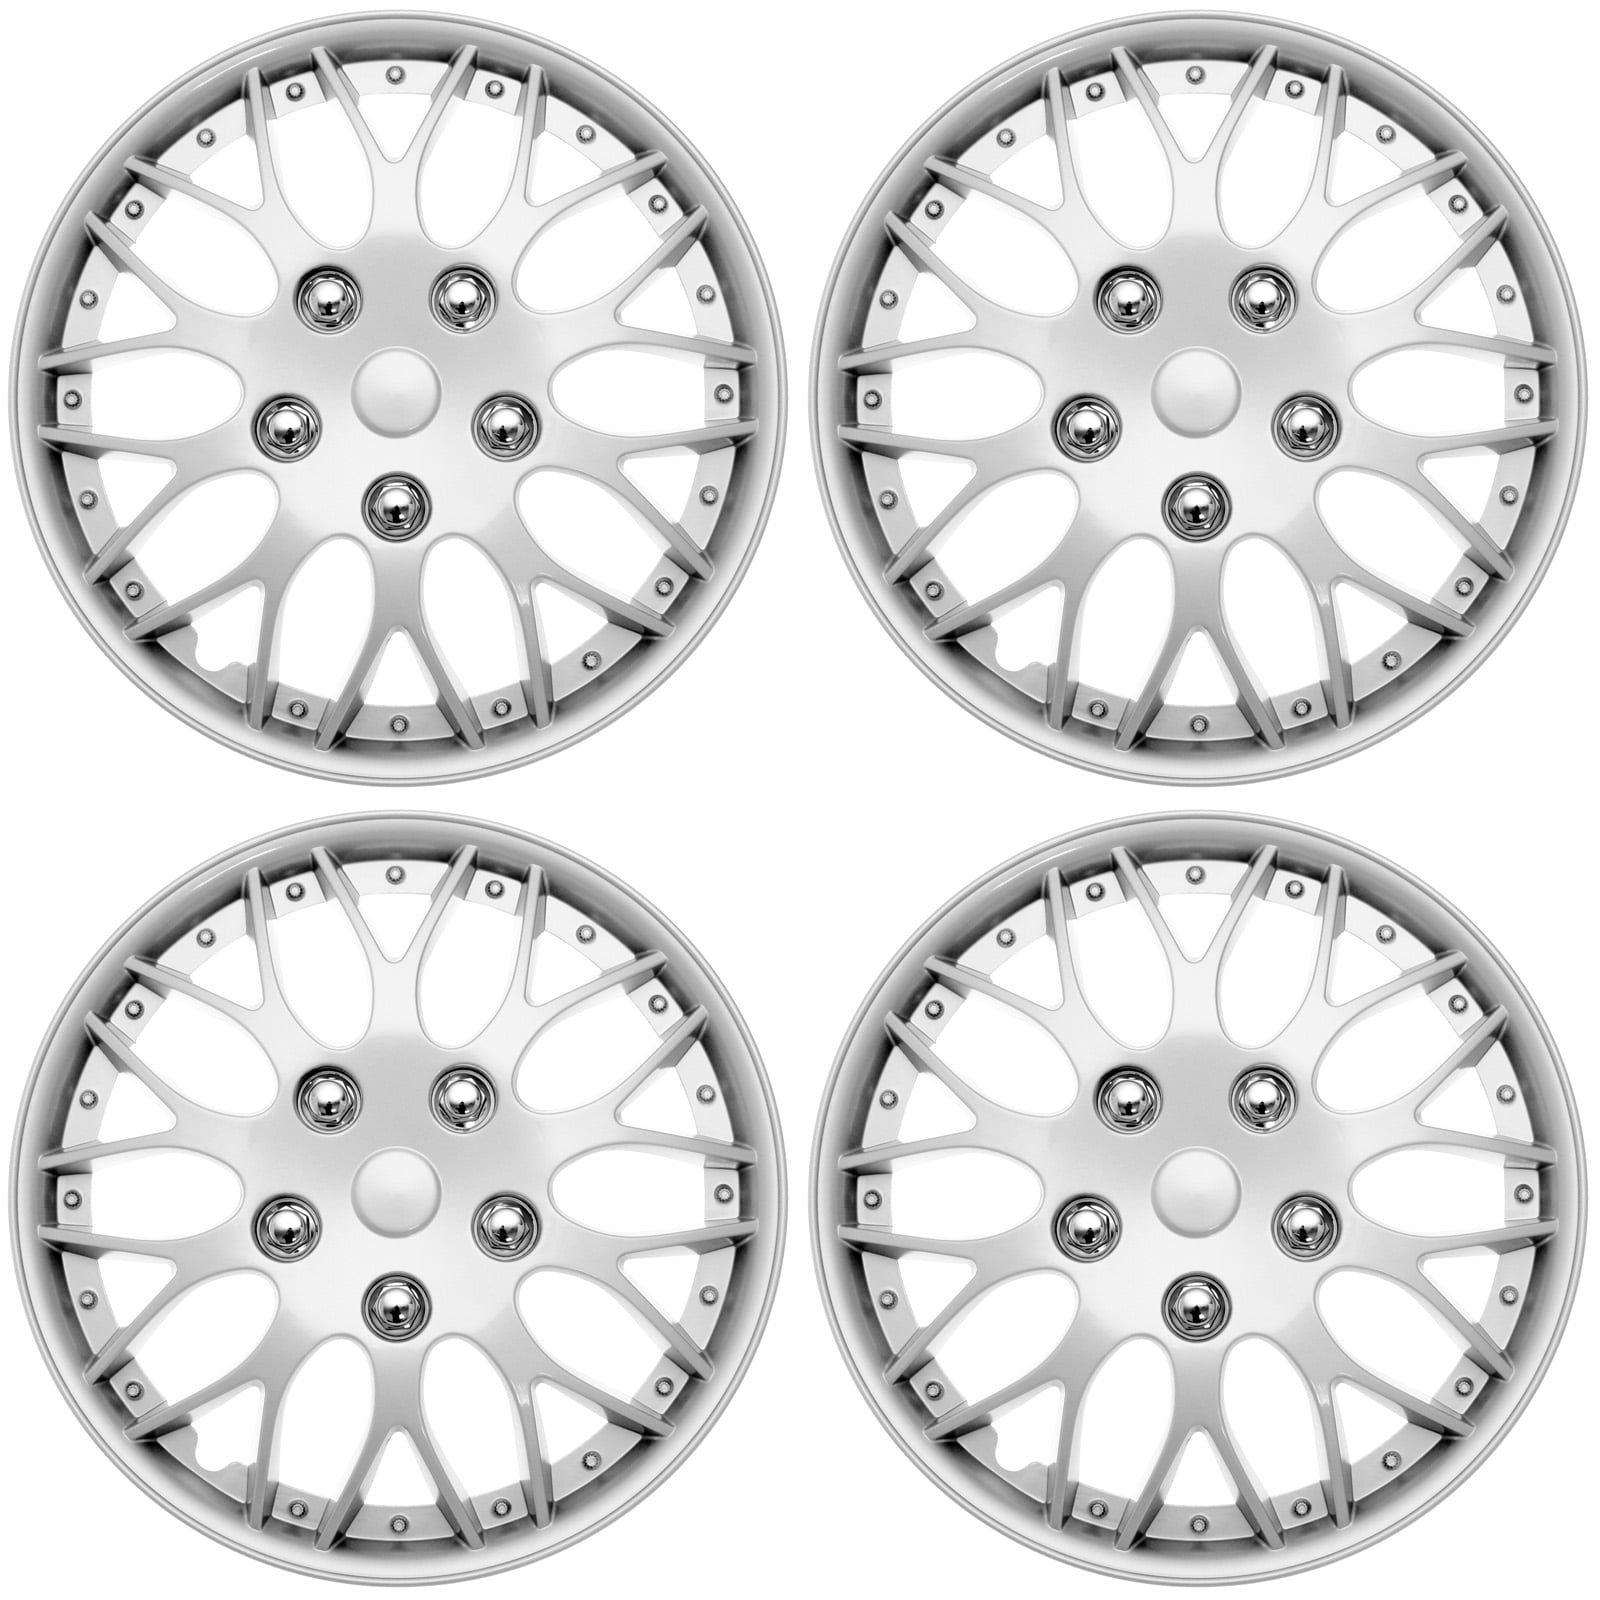 #025 Replacement 16" Inches Metallic Silver Hubcaps 4pcs Set Hub Cap Wheel Cover 